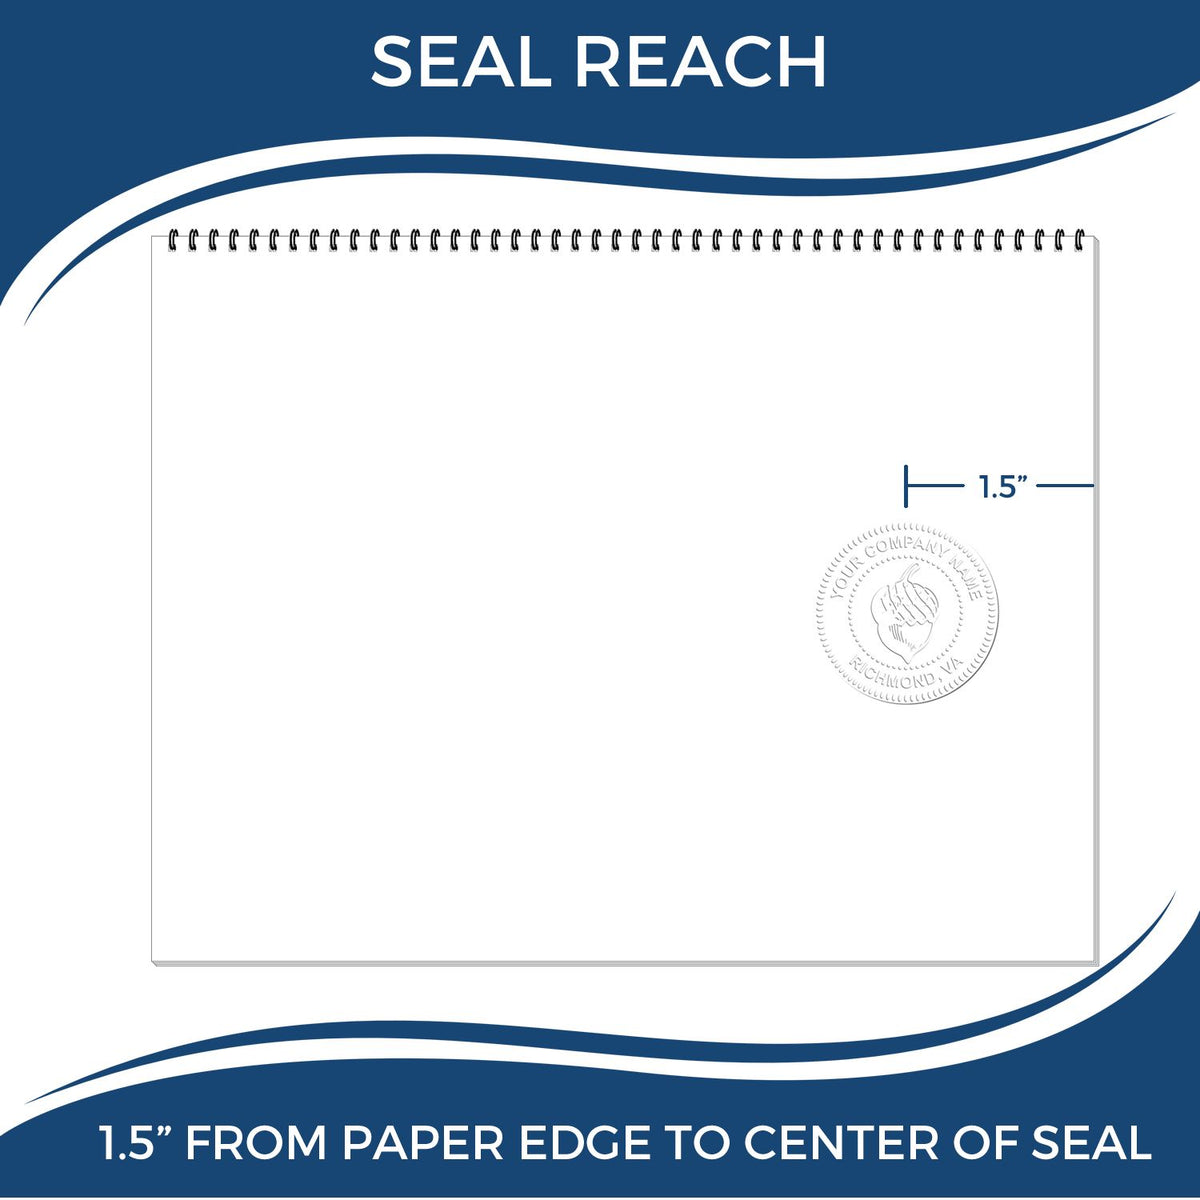 An infographic showing the seal reach which is represented by a ruler and a miniature seal image of the Soft Pocket South Carolina Landscape Architect Embosser